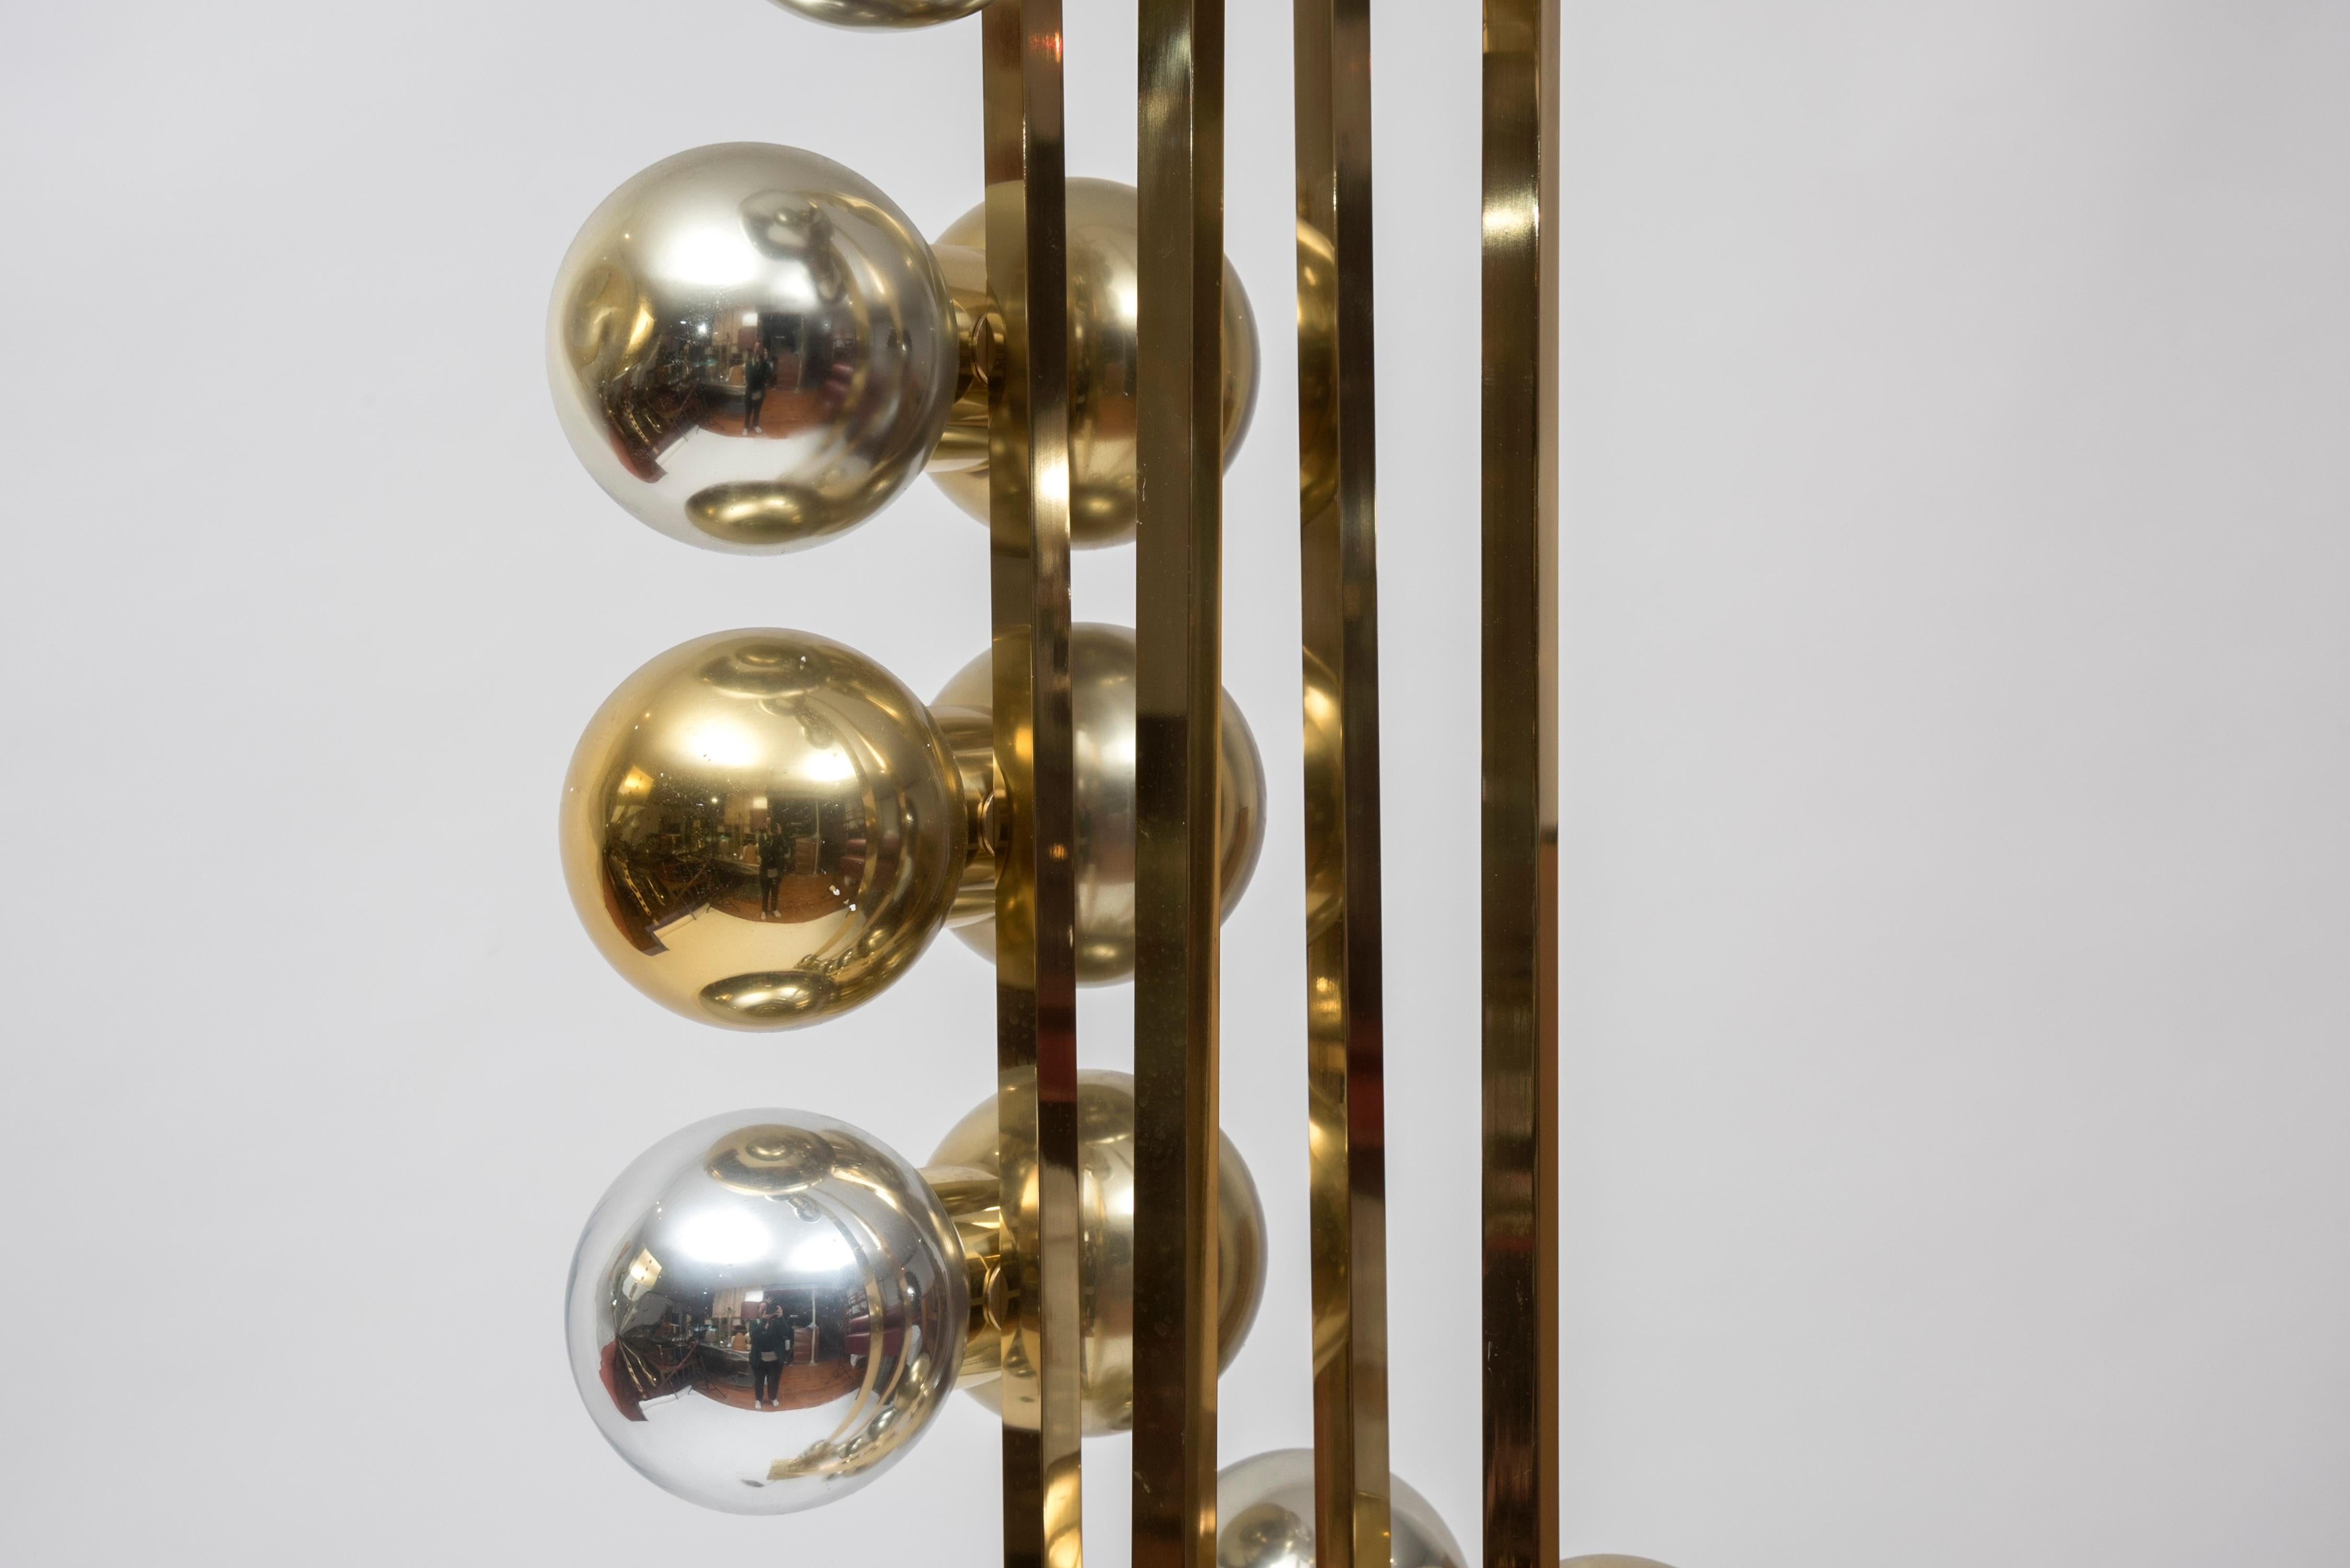 Space age floor lamp in brass with mercury ball glass,
circa 1980s
France

